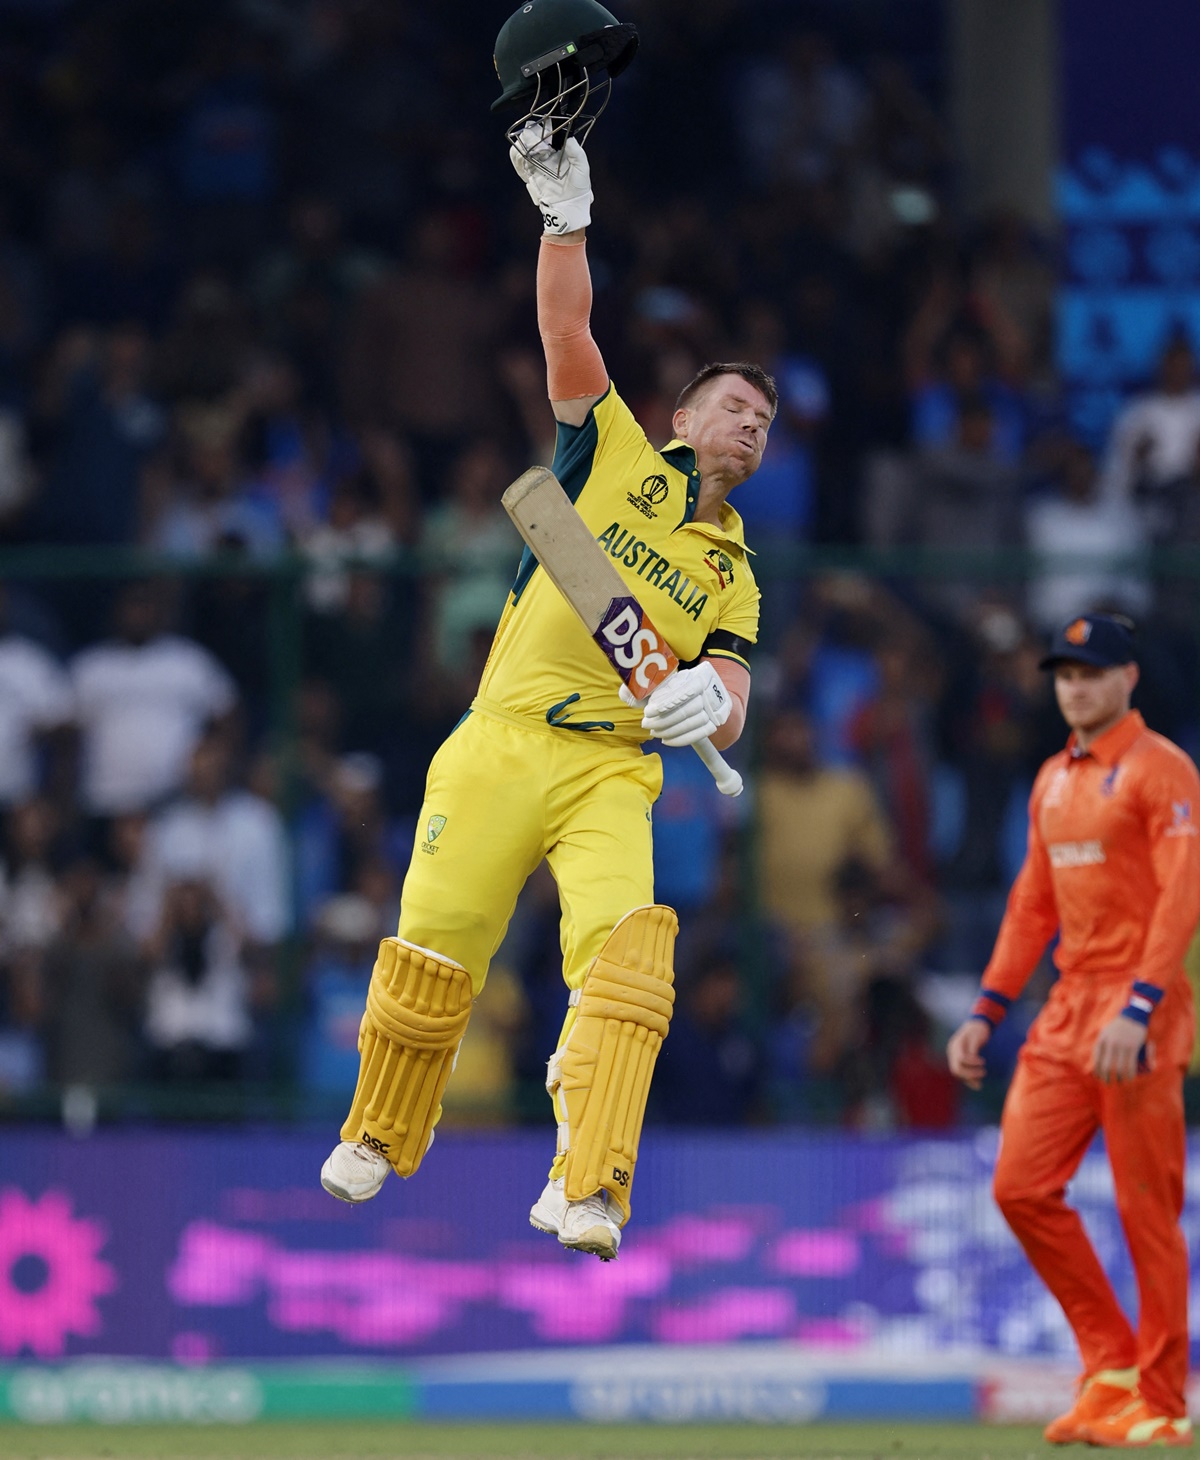 With 6, David Warner now has the most World Cup tons by an Australian